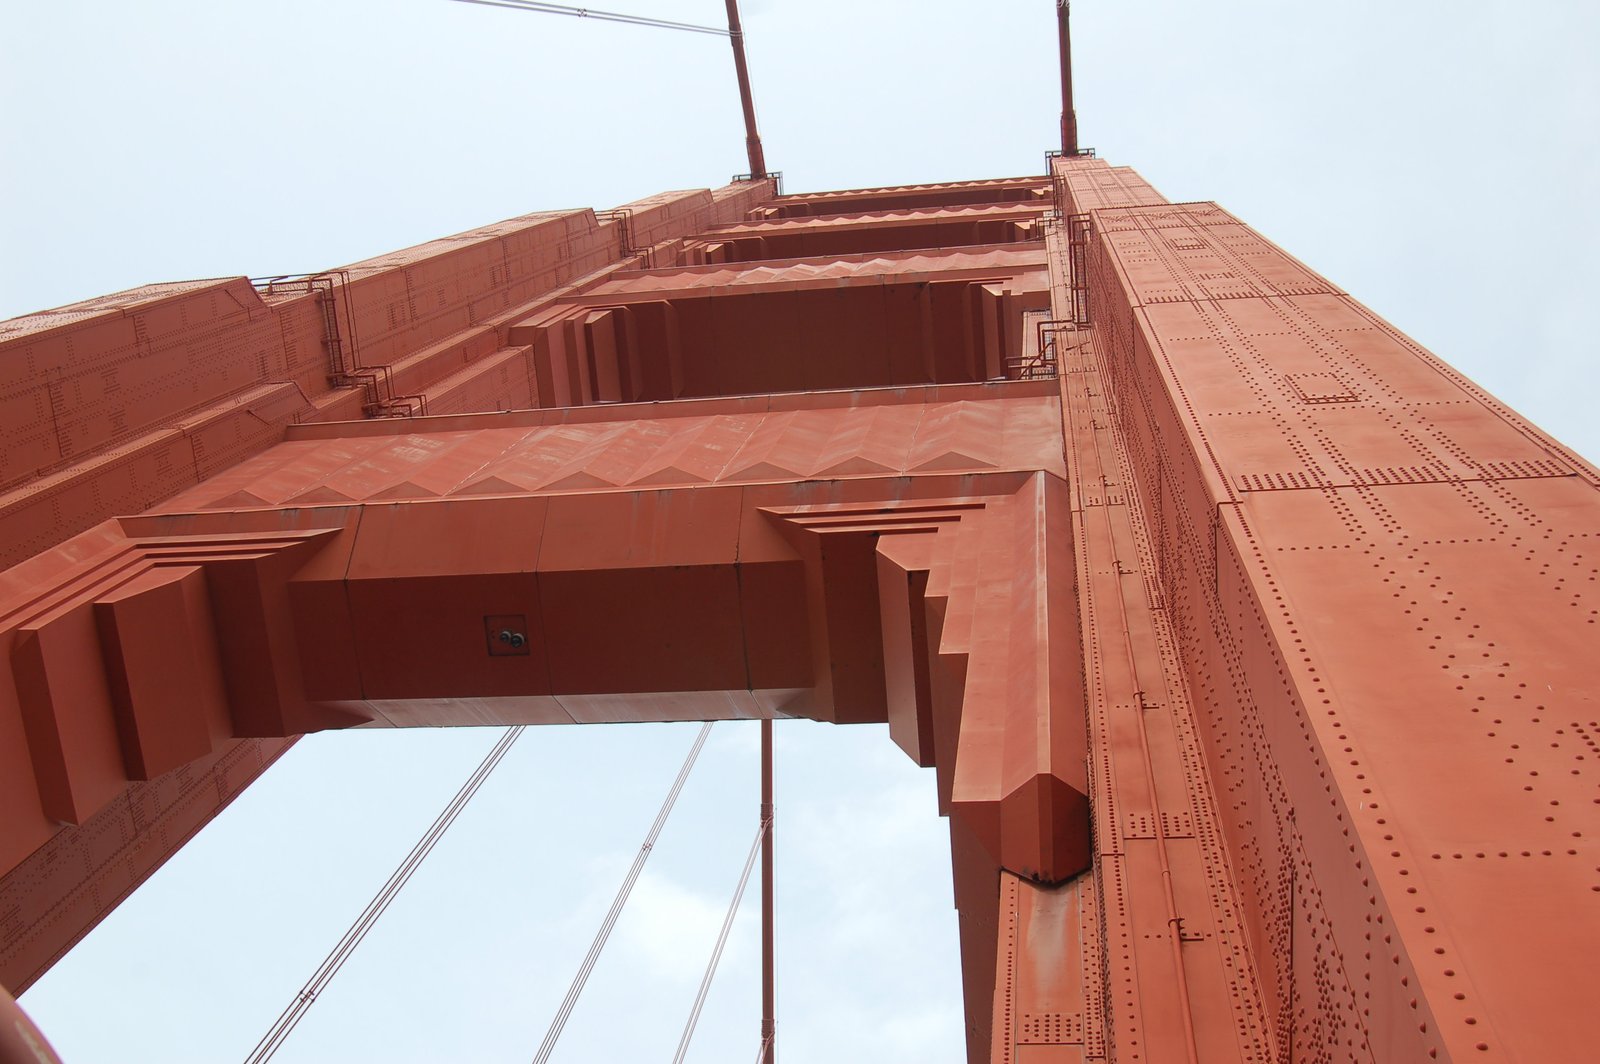 Looking up at the north tower of the Golden Gate Bridge, San Francisco, California 